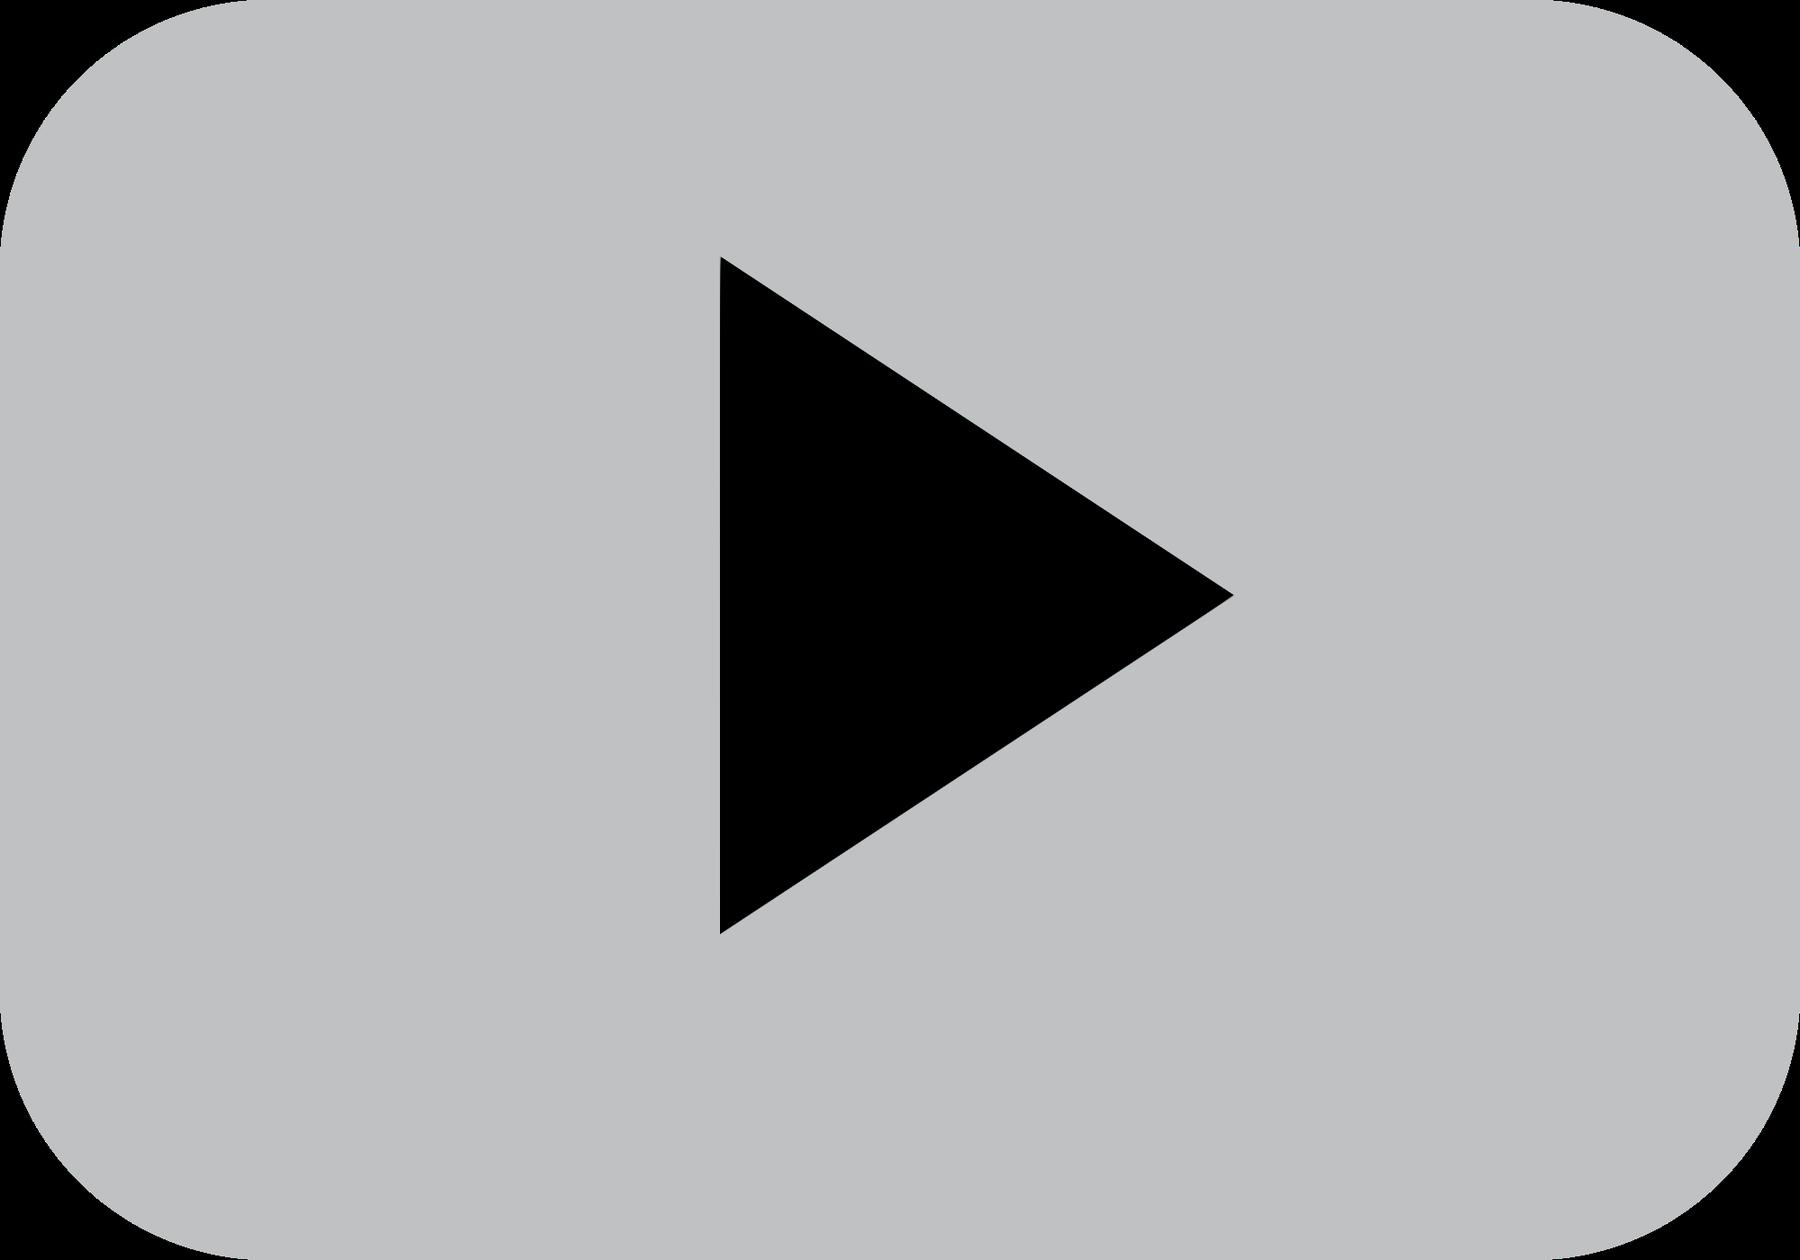 a video player's guide - File:YouTube Silver Play Button.png